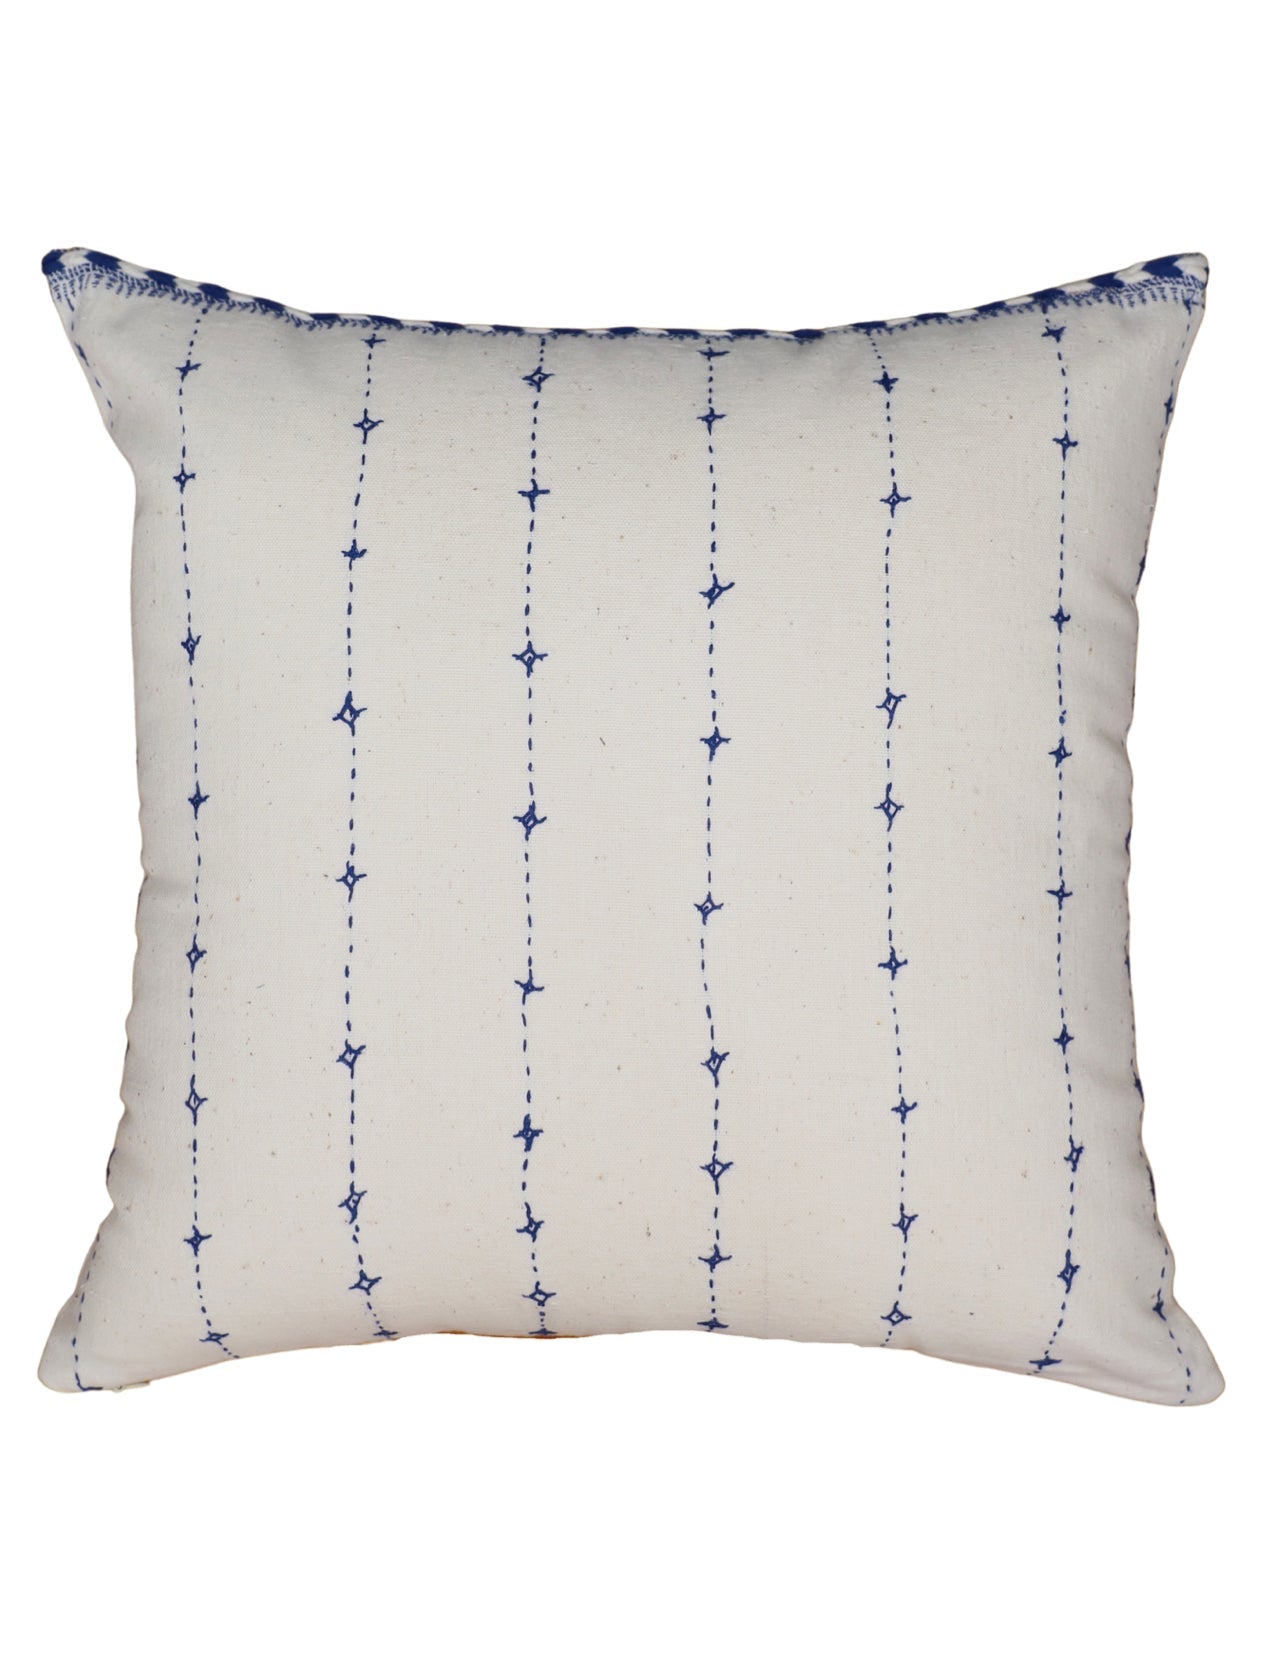 Celestea Throw Pillow Cover - Passion Lilie - Fair Trade - Sustainable Fashion